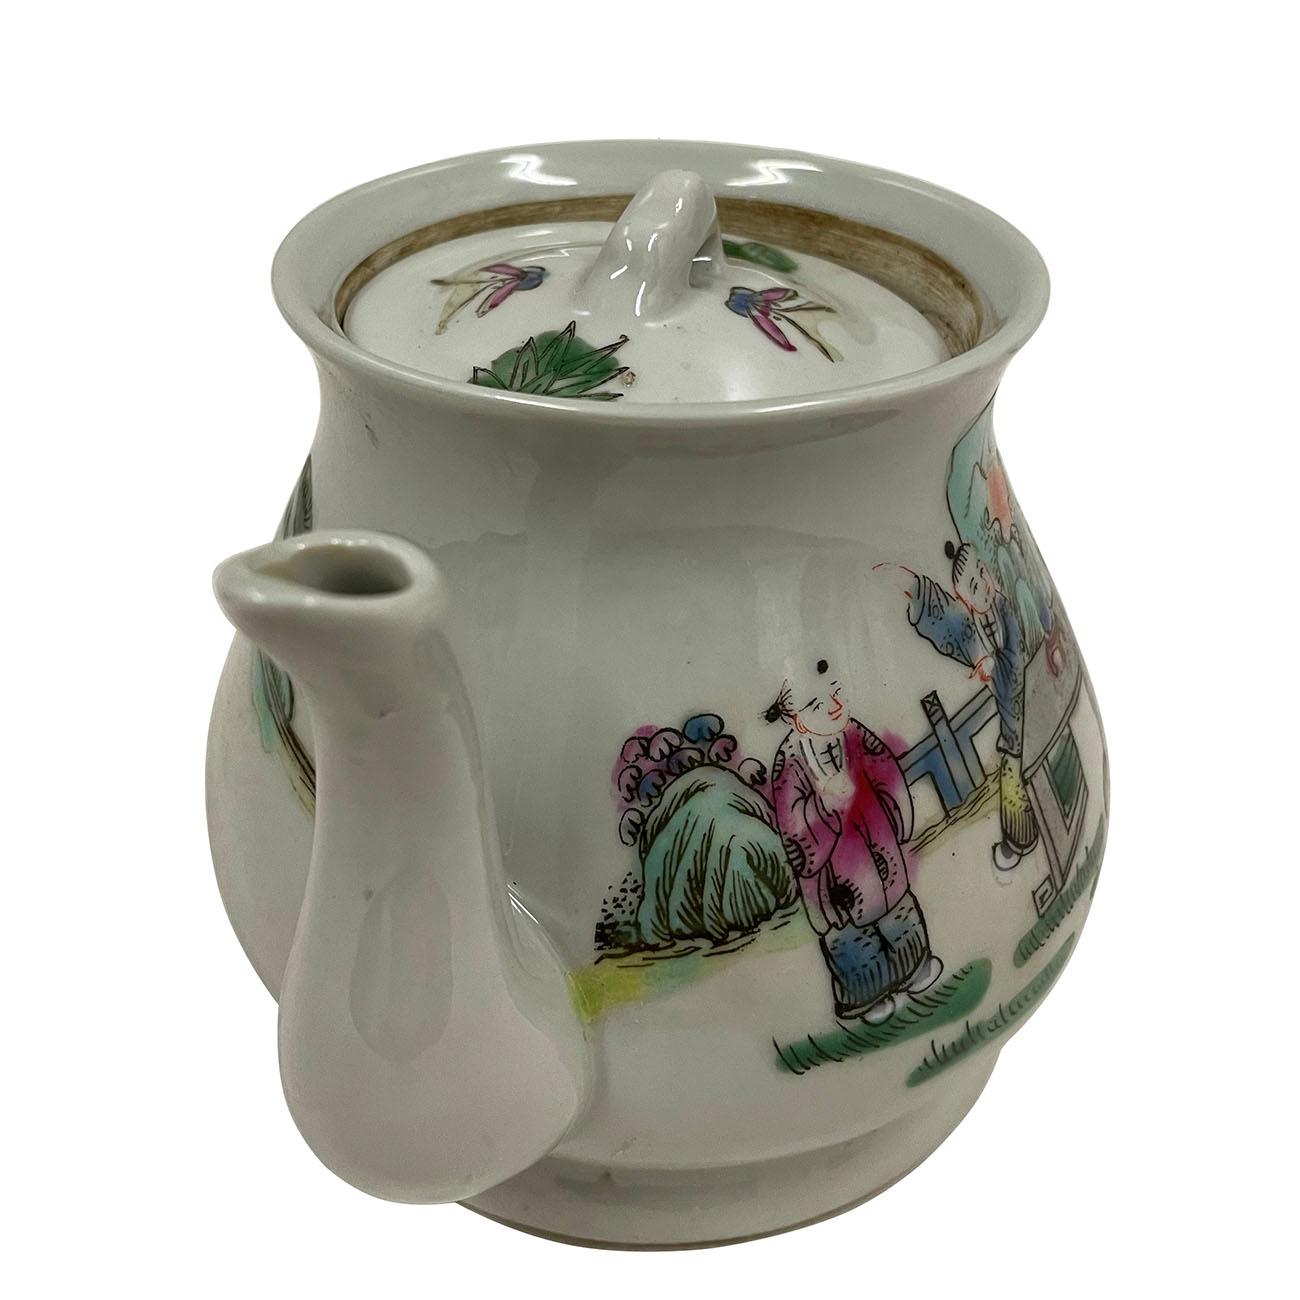 Look at this magnificent antique Chinese porcelain teapot. It was hand made and hand paint with beautiful Chinese traditional design on it. You can see from the pictures that it has many years history with very good condition, no damages. Now you